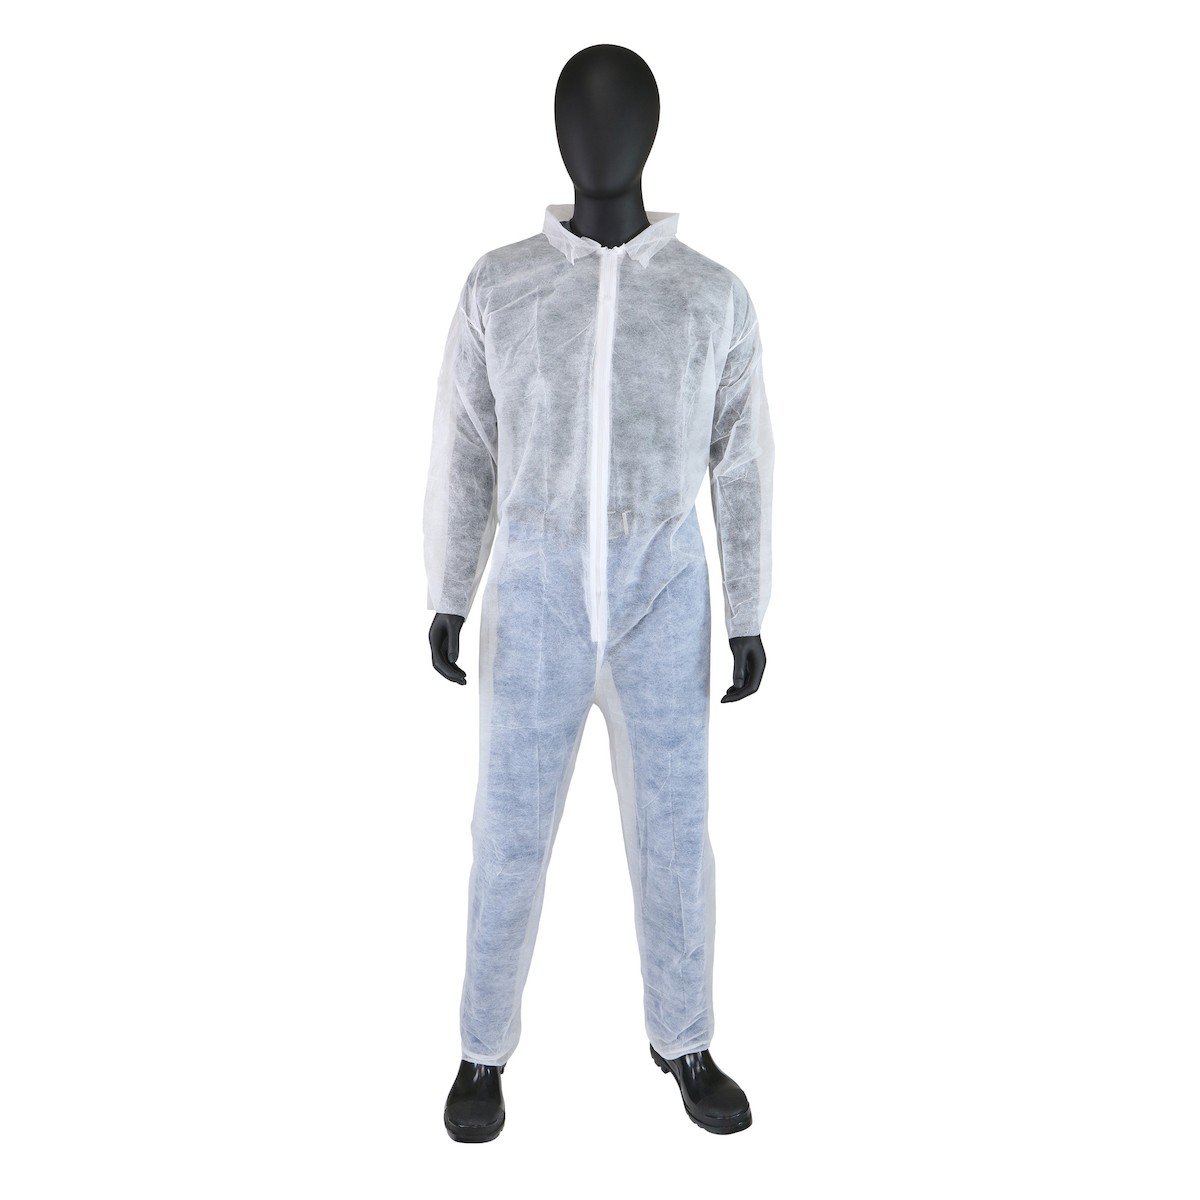 Coverall SBPP Zip Front Collar Elastic Wrist and Ankle White LG 25/CS